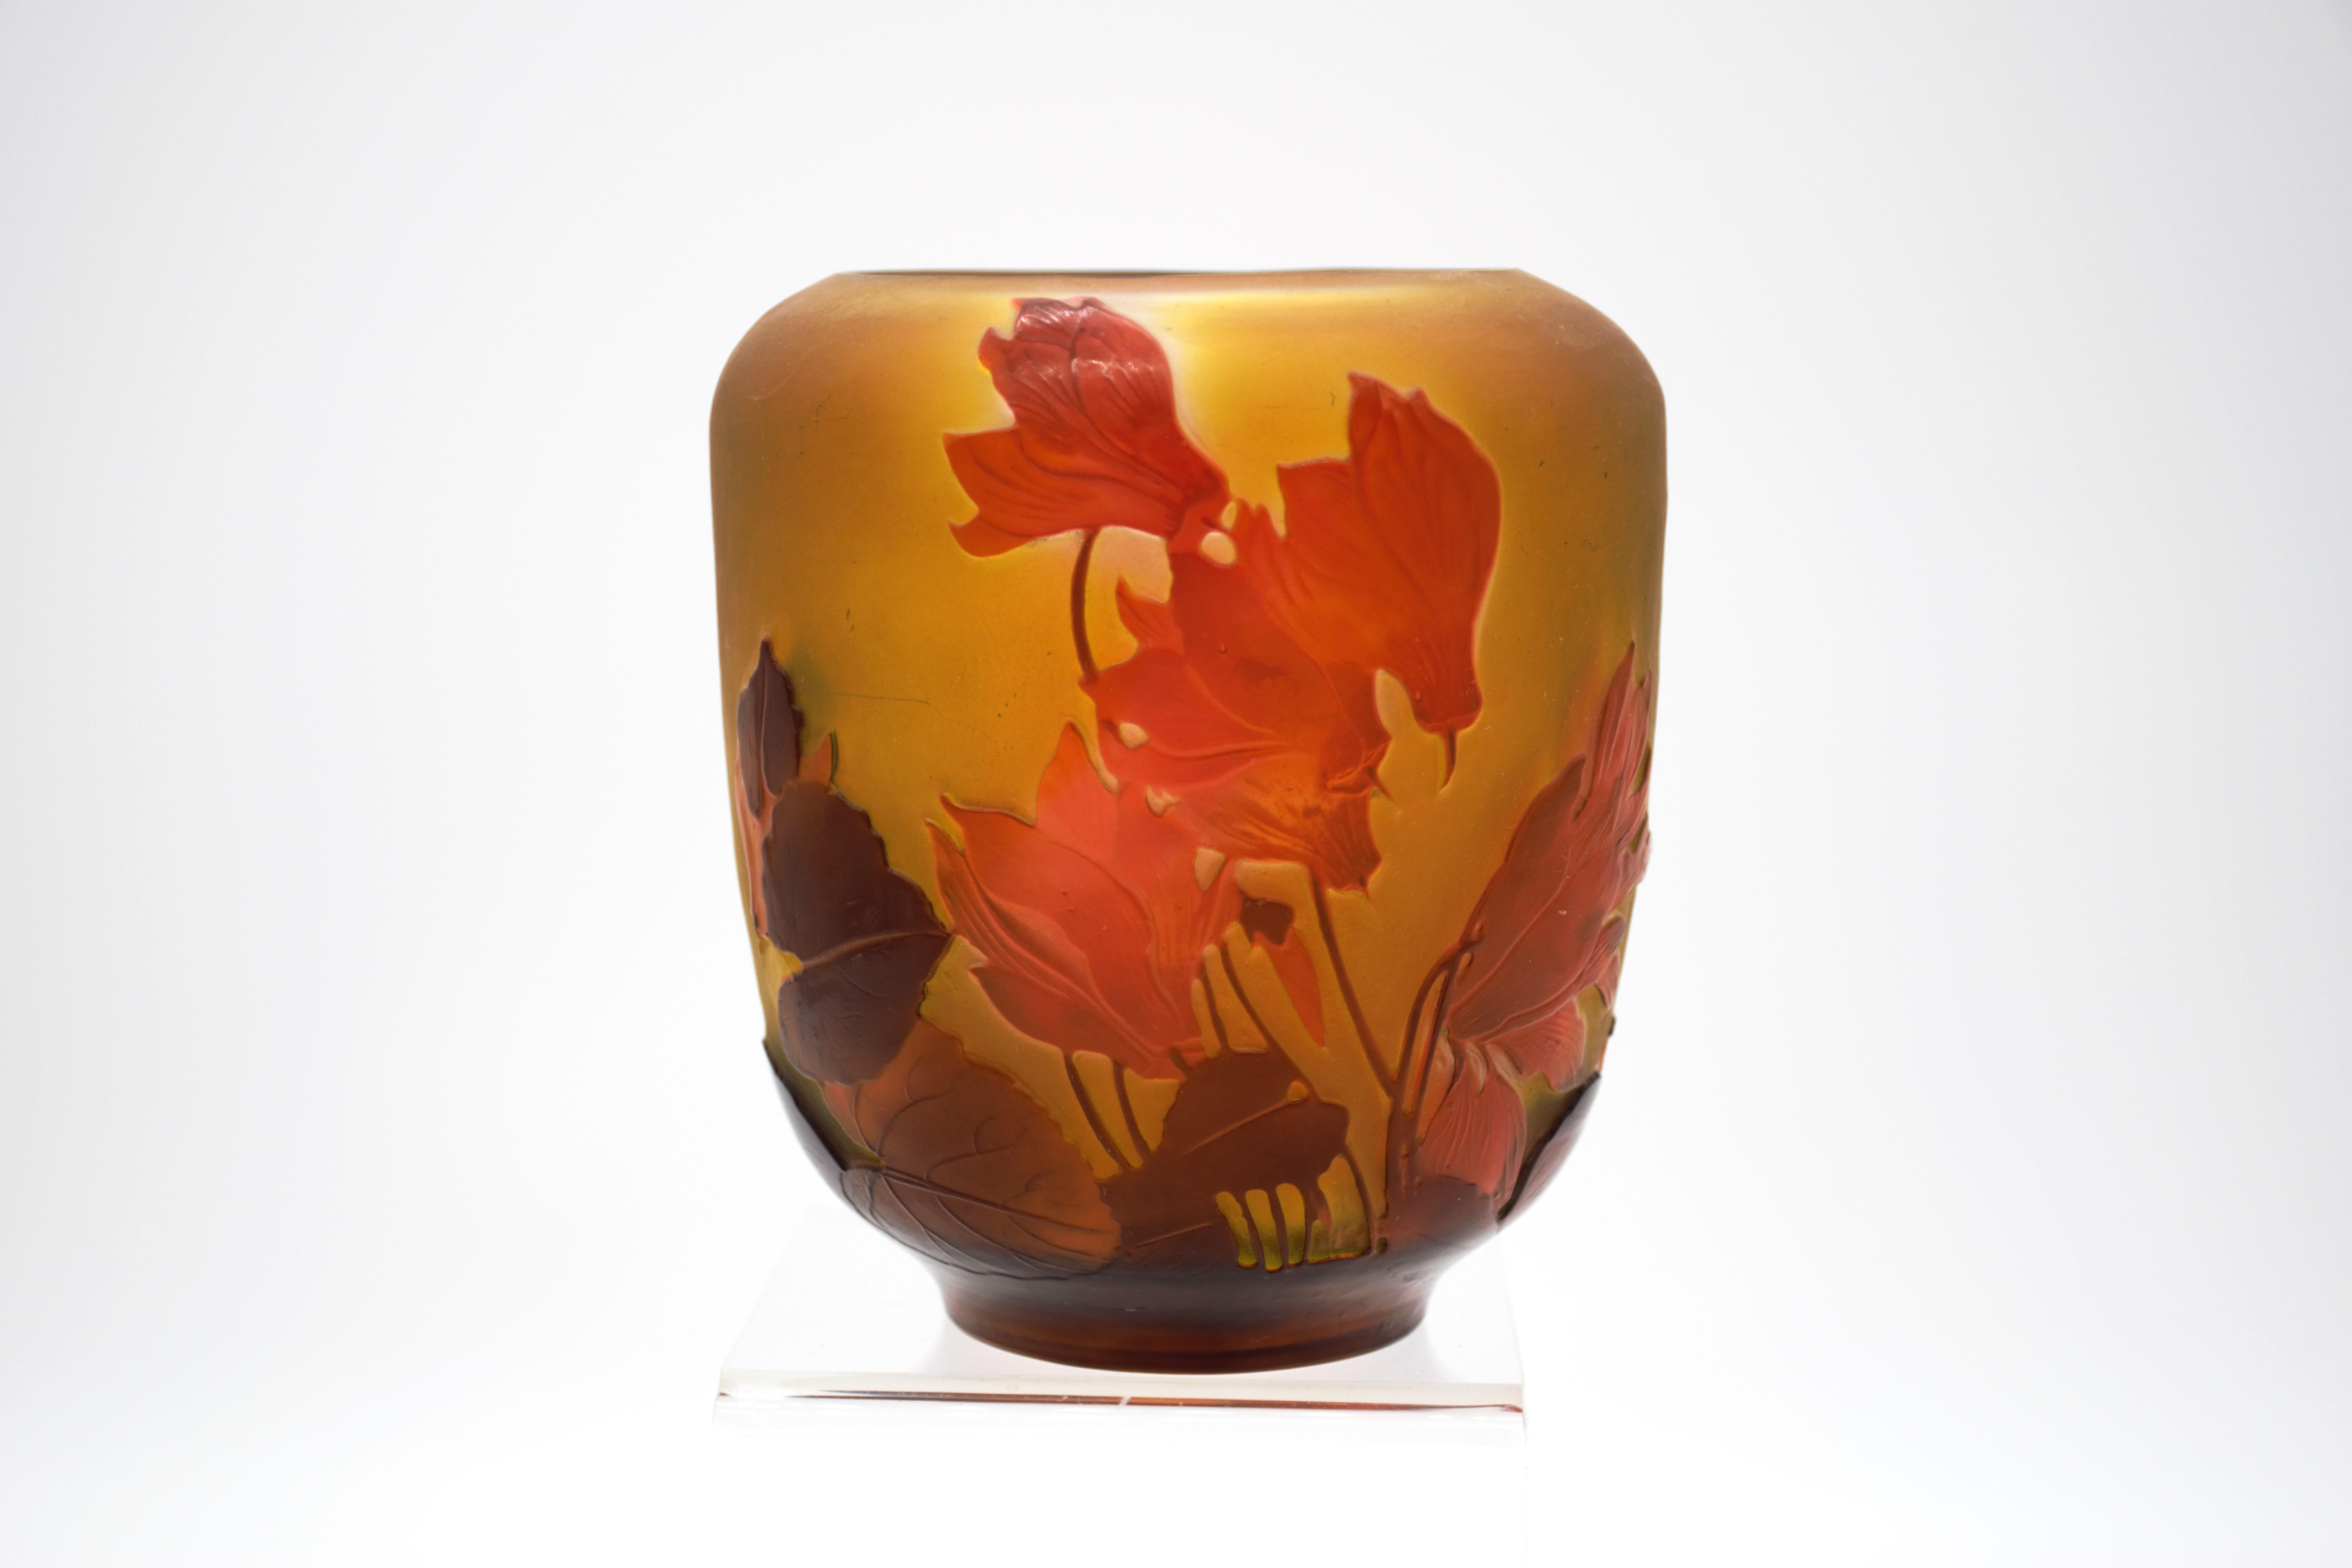 An attractive late 19th Century cameo glass vase of low but wide form cut with decorative red cyclamen flowers against a warm yellow background with excellent hand finished detail and colour, signed Galle in cameo, this vase is rare because of the